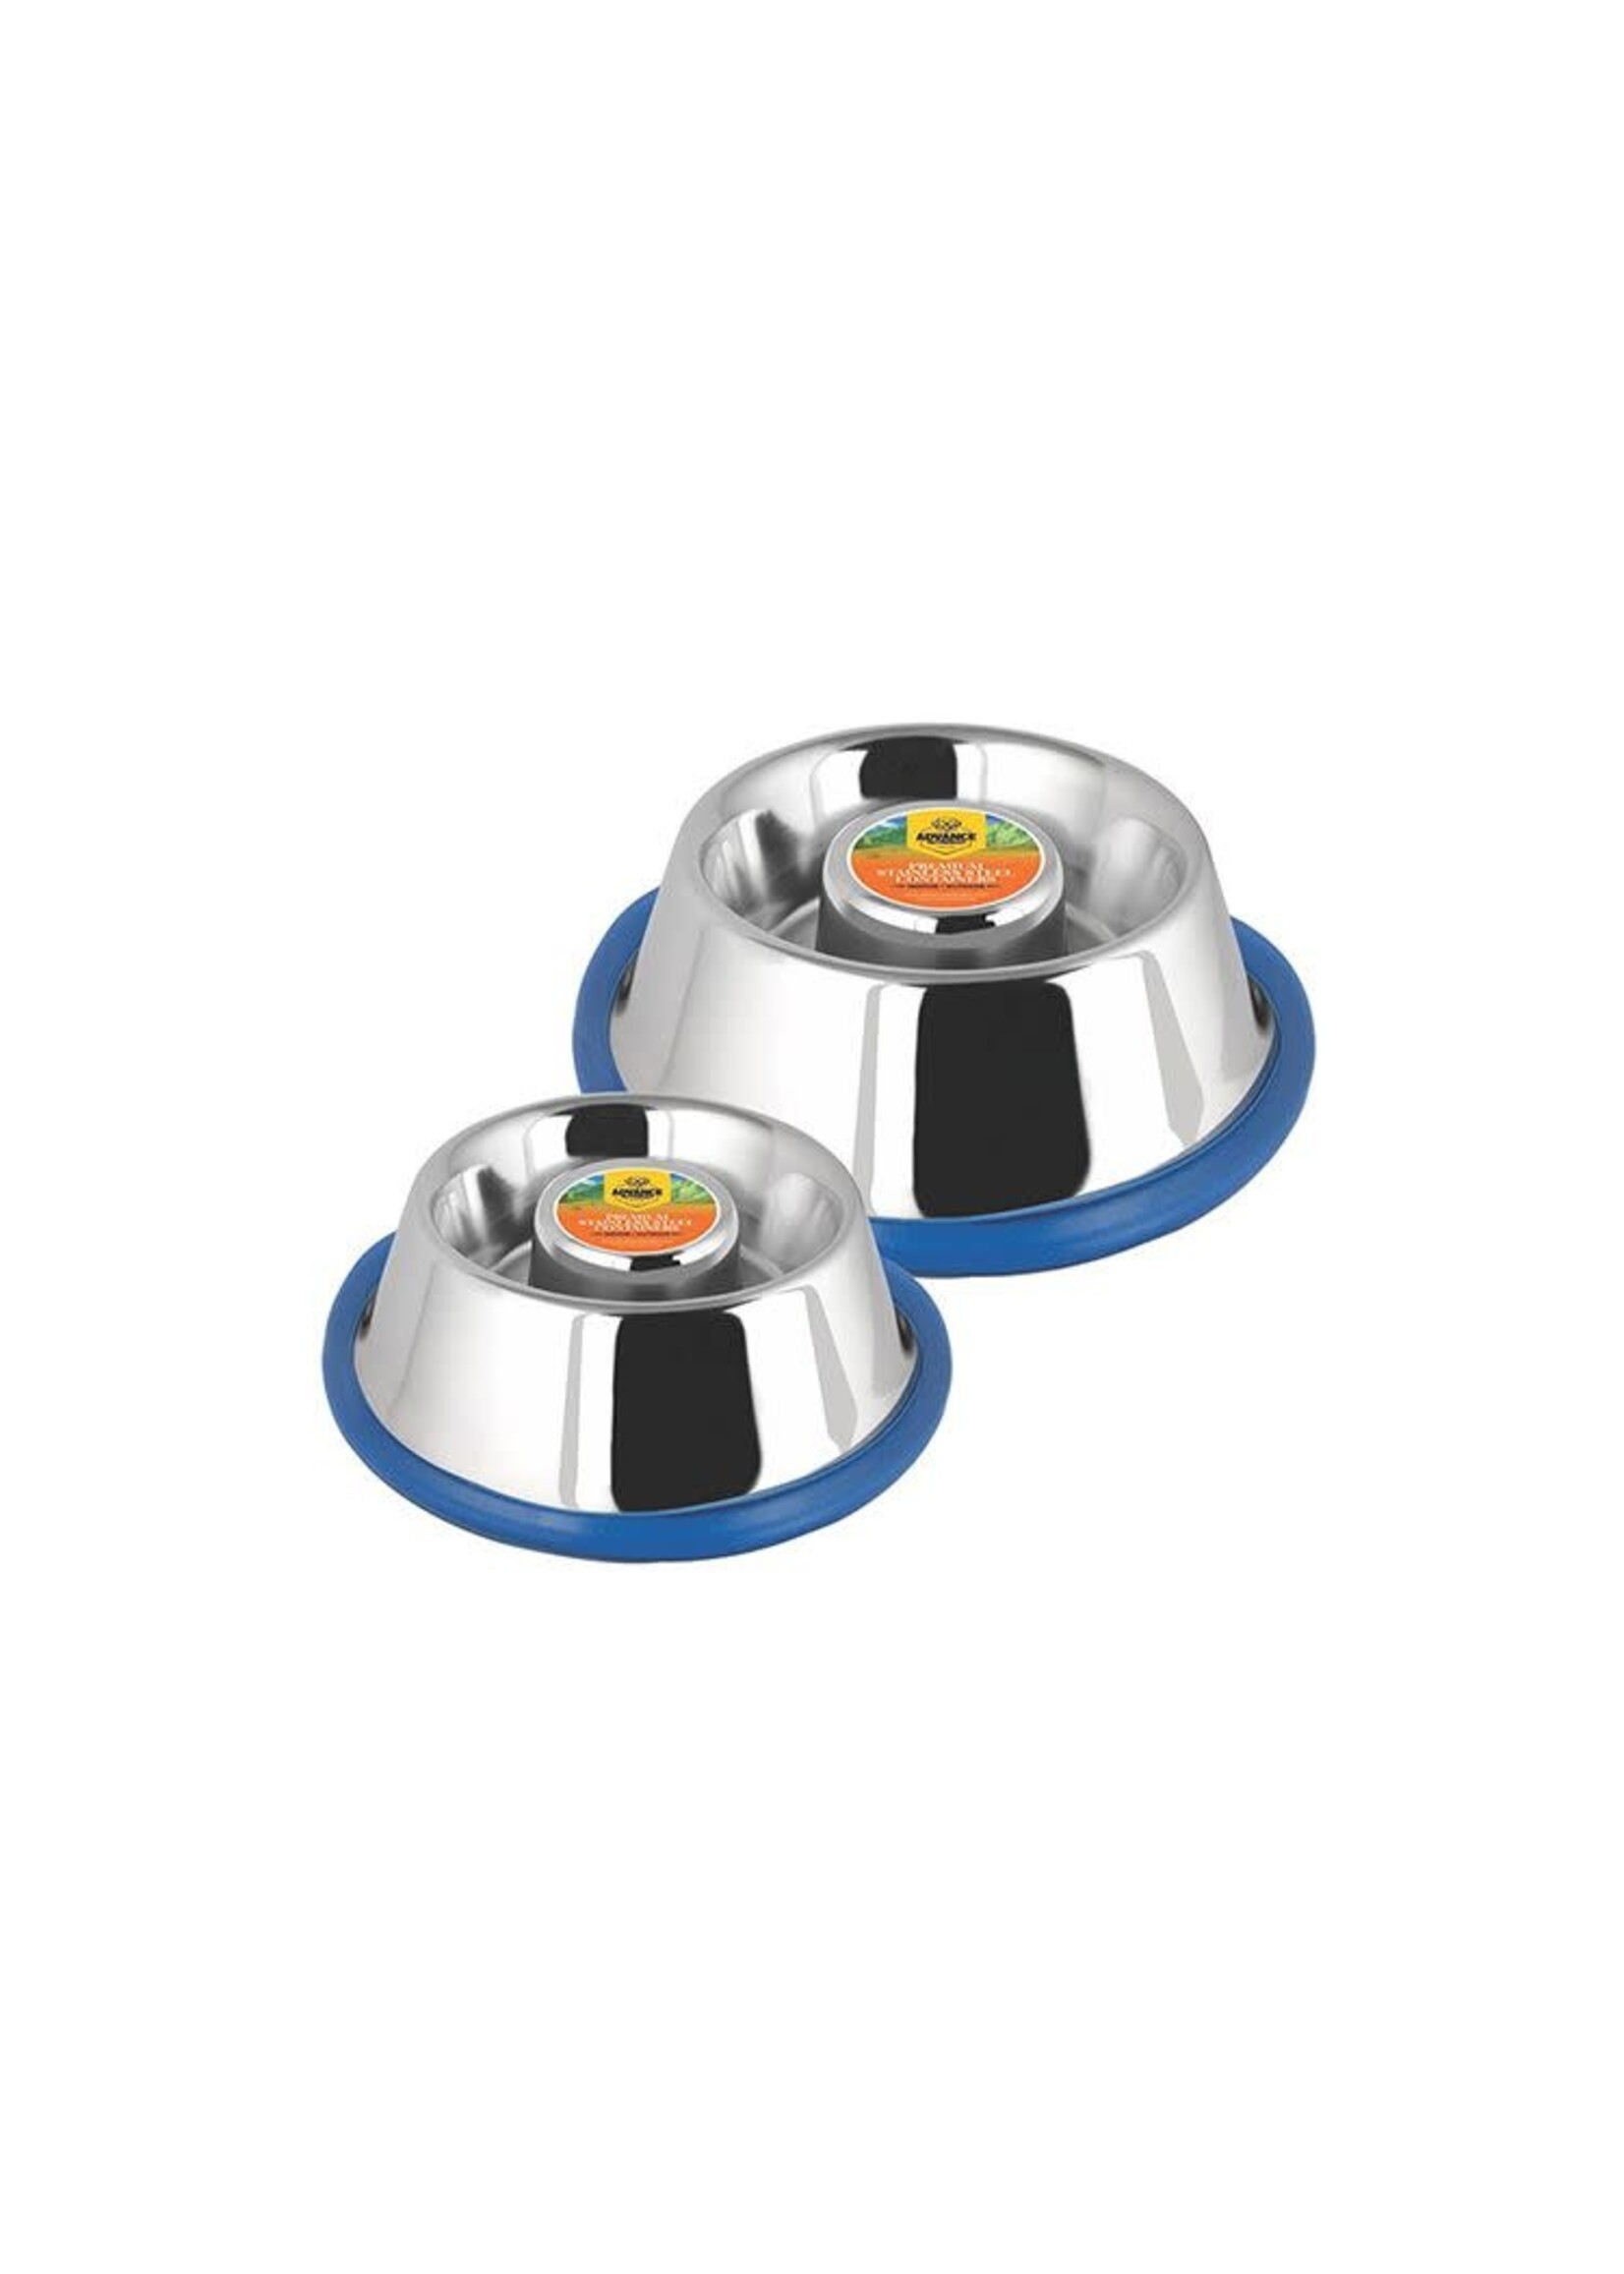 Tailfin Sports Advanced Pet Products Slow Feeding Stainless Steel Bowl - 26 oz.